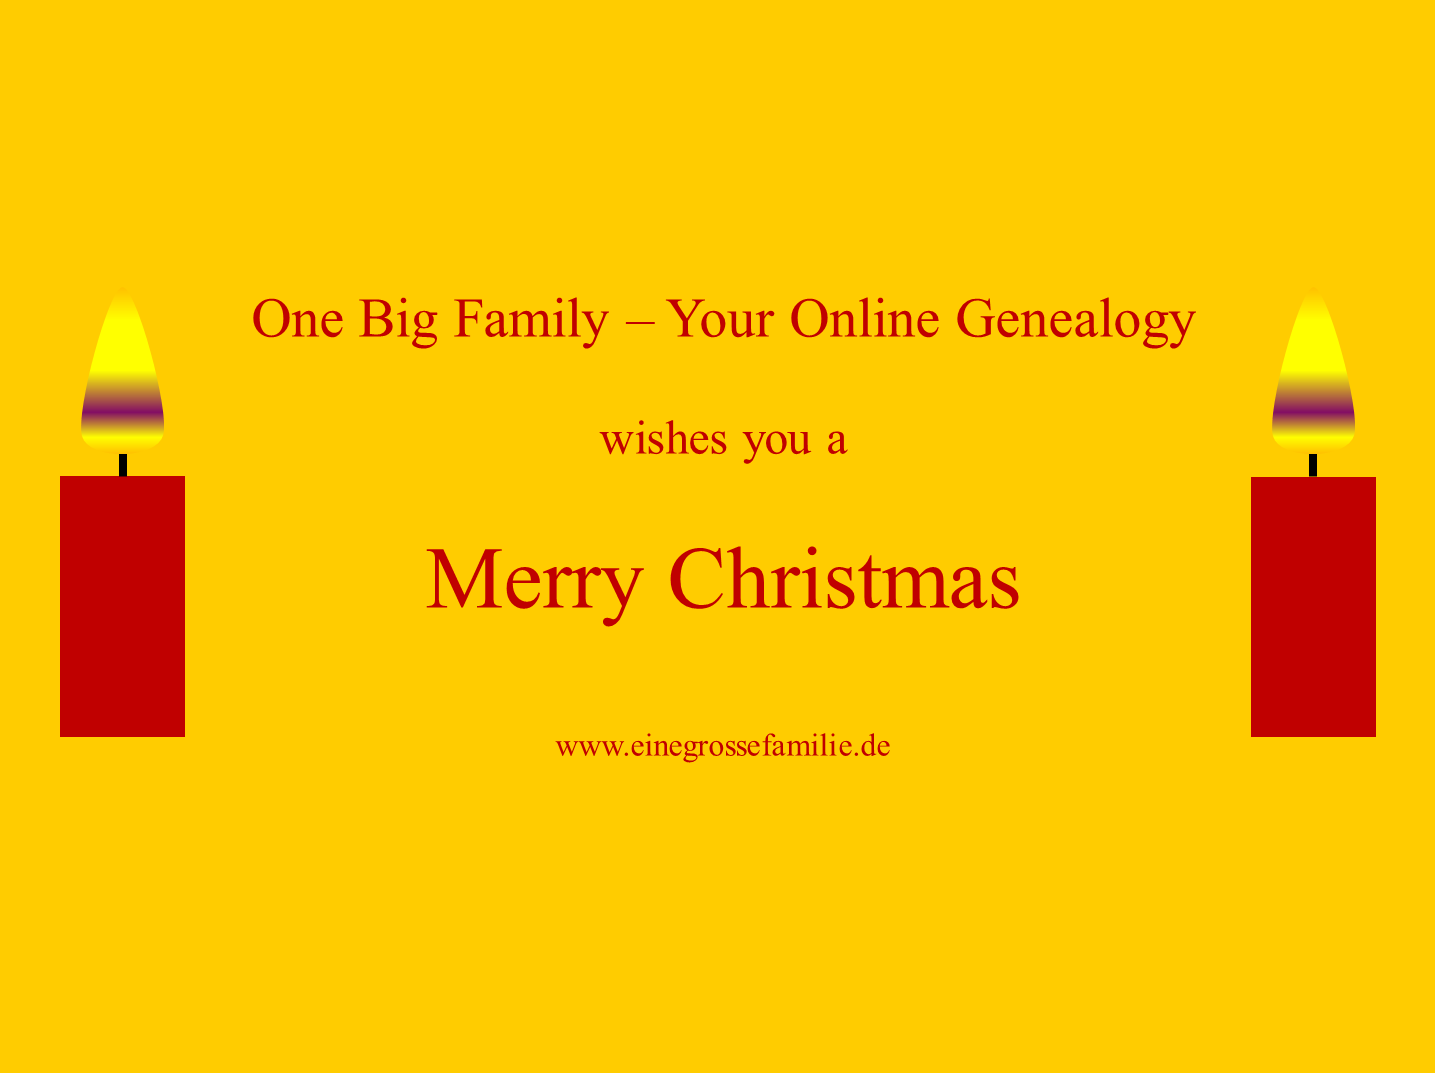 One Big Family - Your Online Genealogy wishes you a Merry Christmas